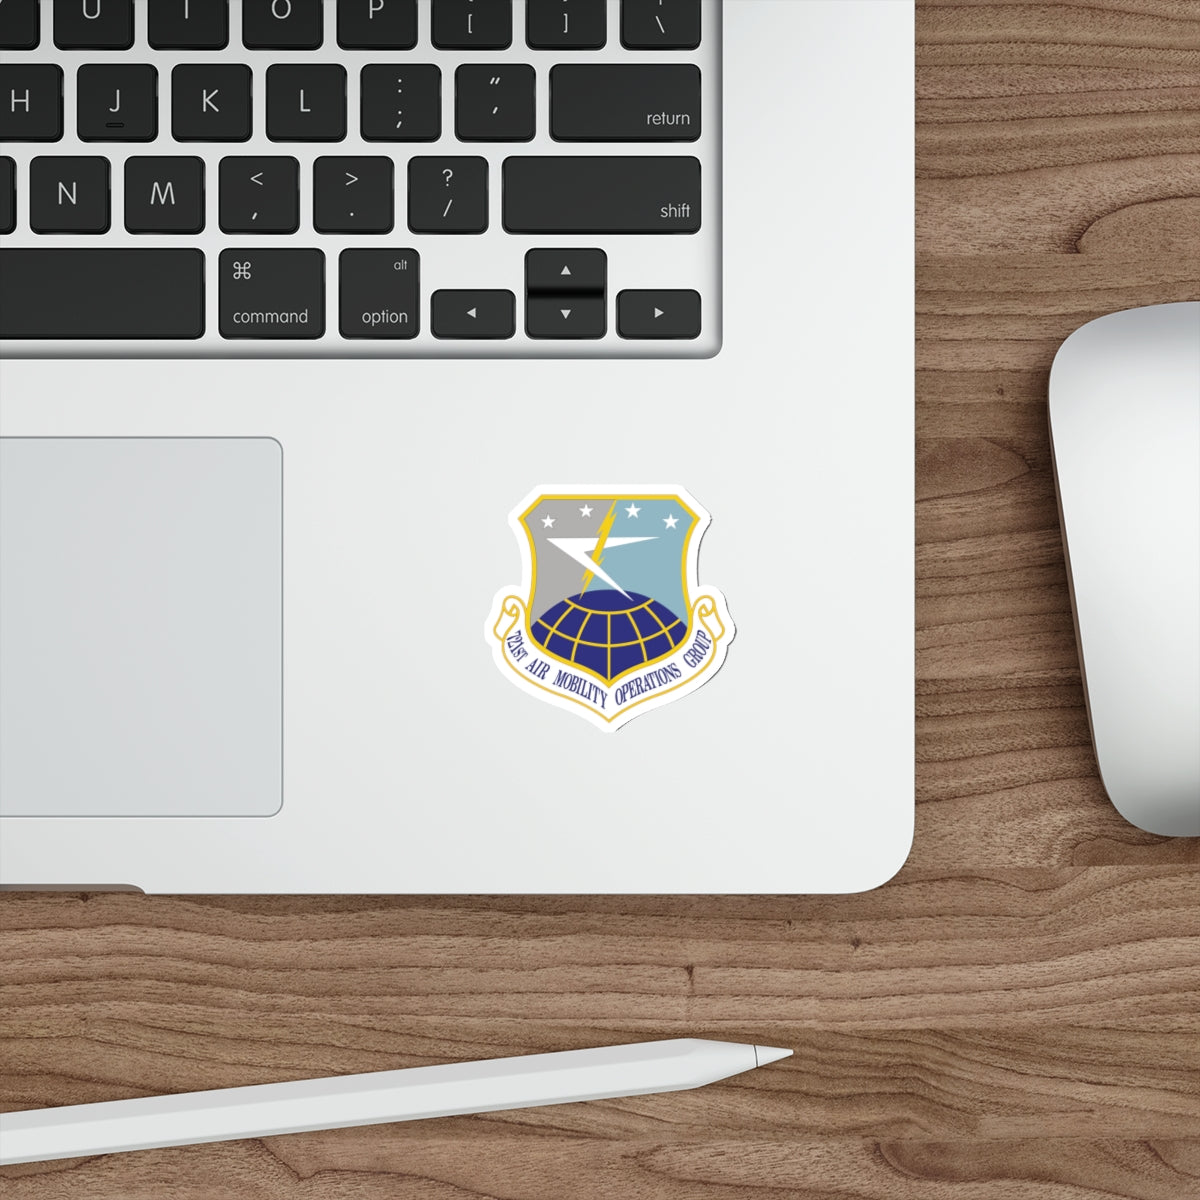 721st Air Mobility Operations Group (U.S. Air Force) STICKER Vinyl Die-Cut Decal-The Sticker Space